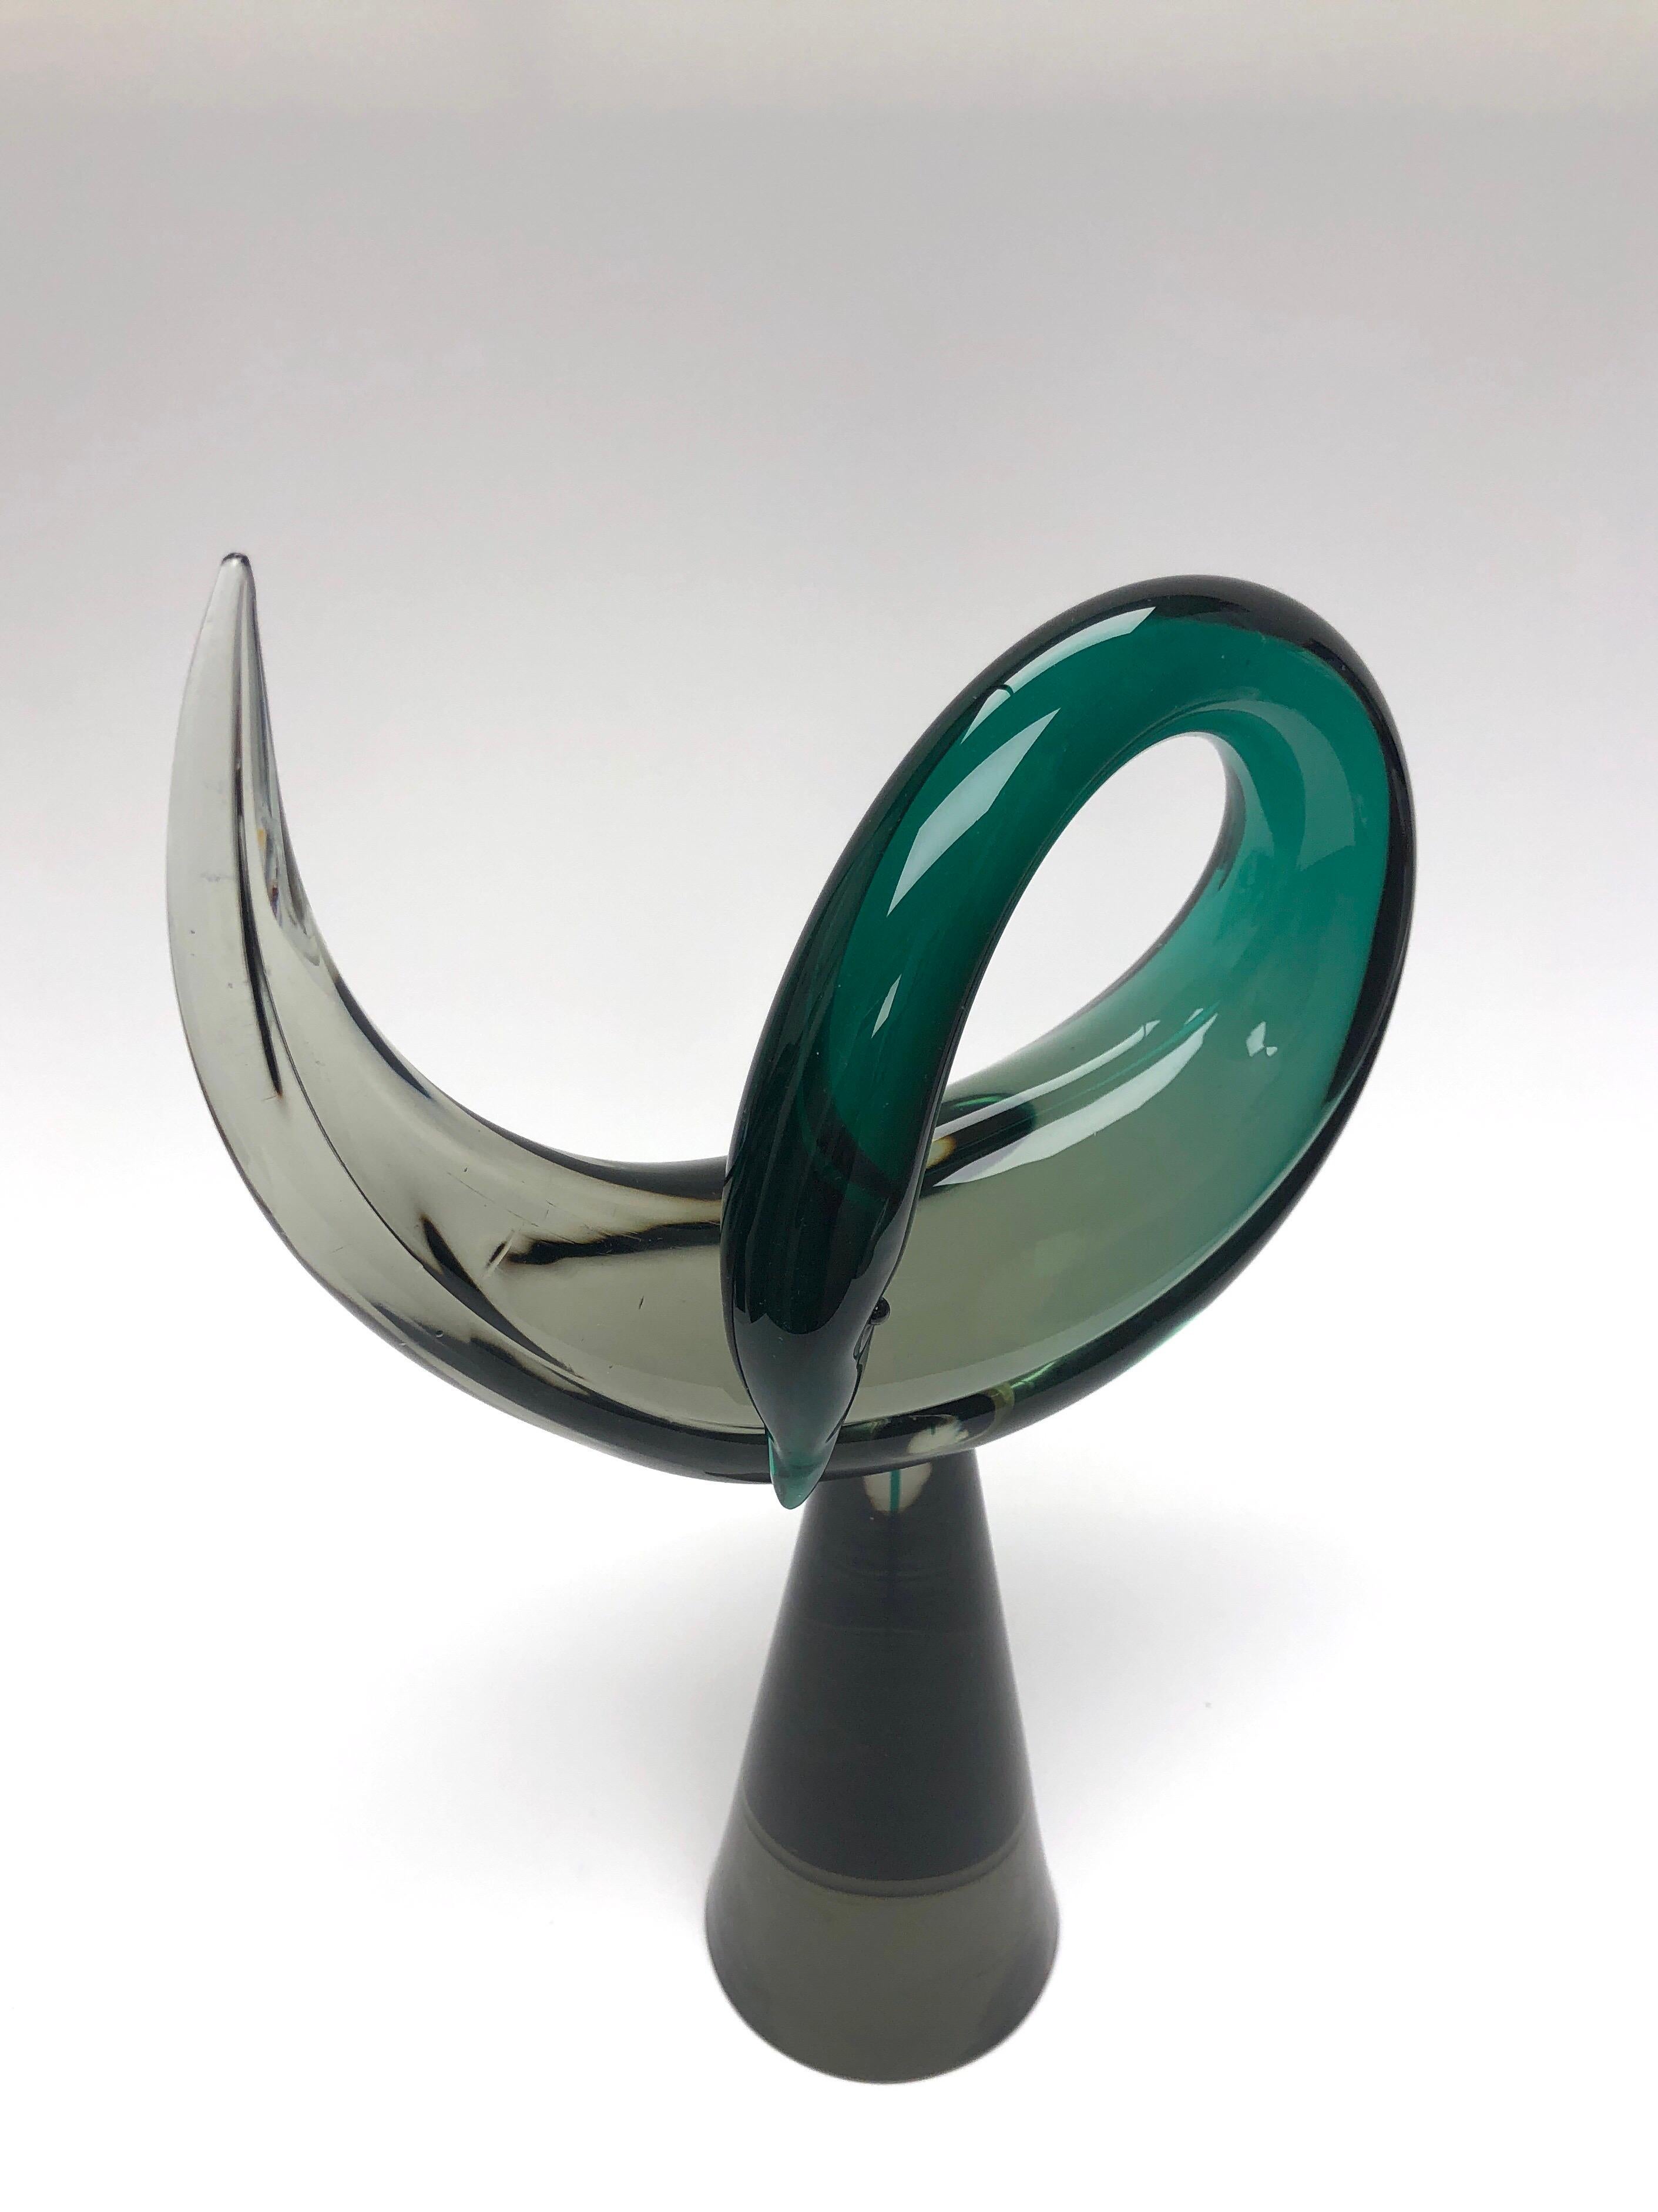 An stylized modern Murano glass sculpture by Gaspari for Salviati. Very clean lines and great color. Signed on bottom.